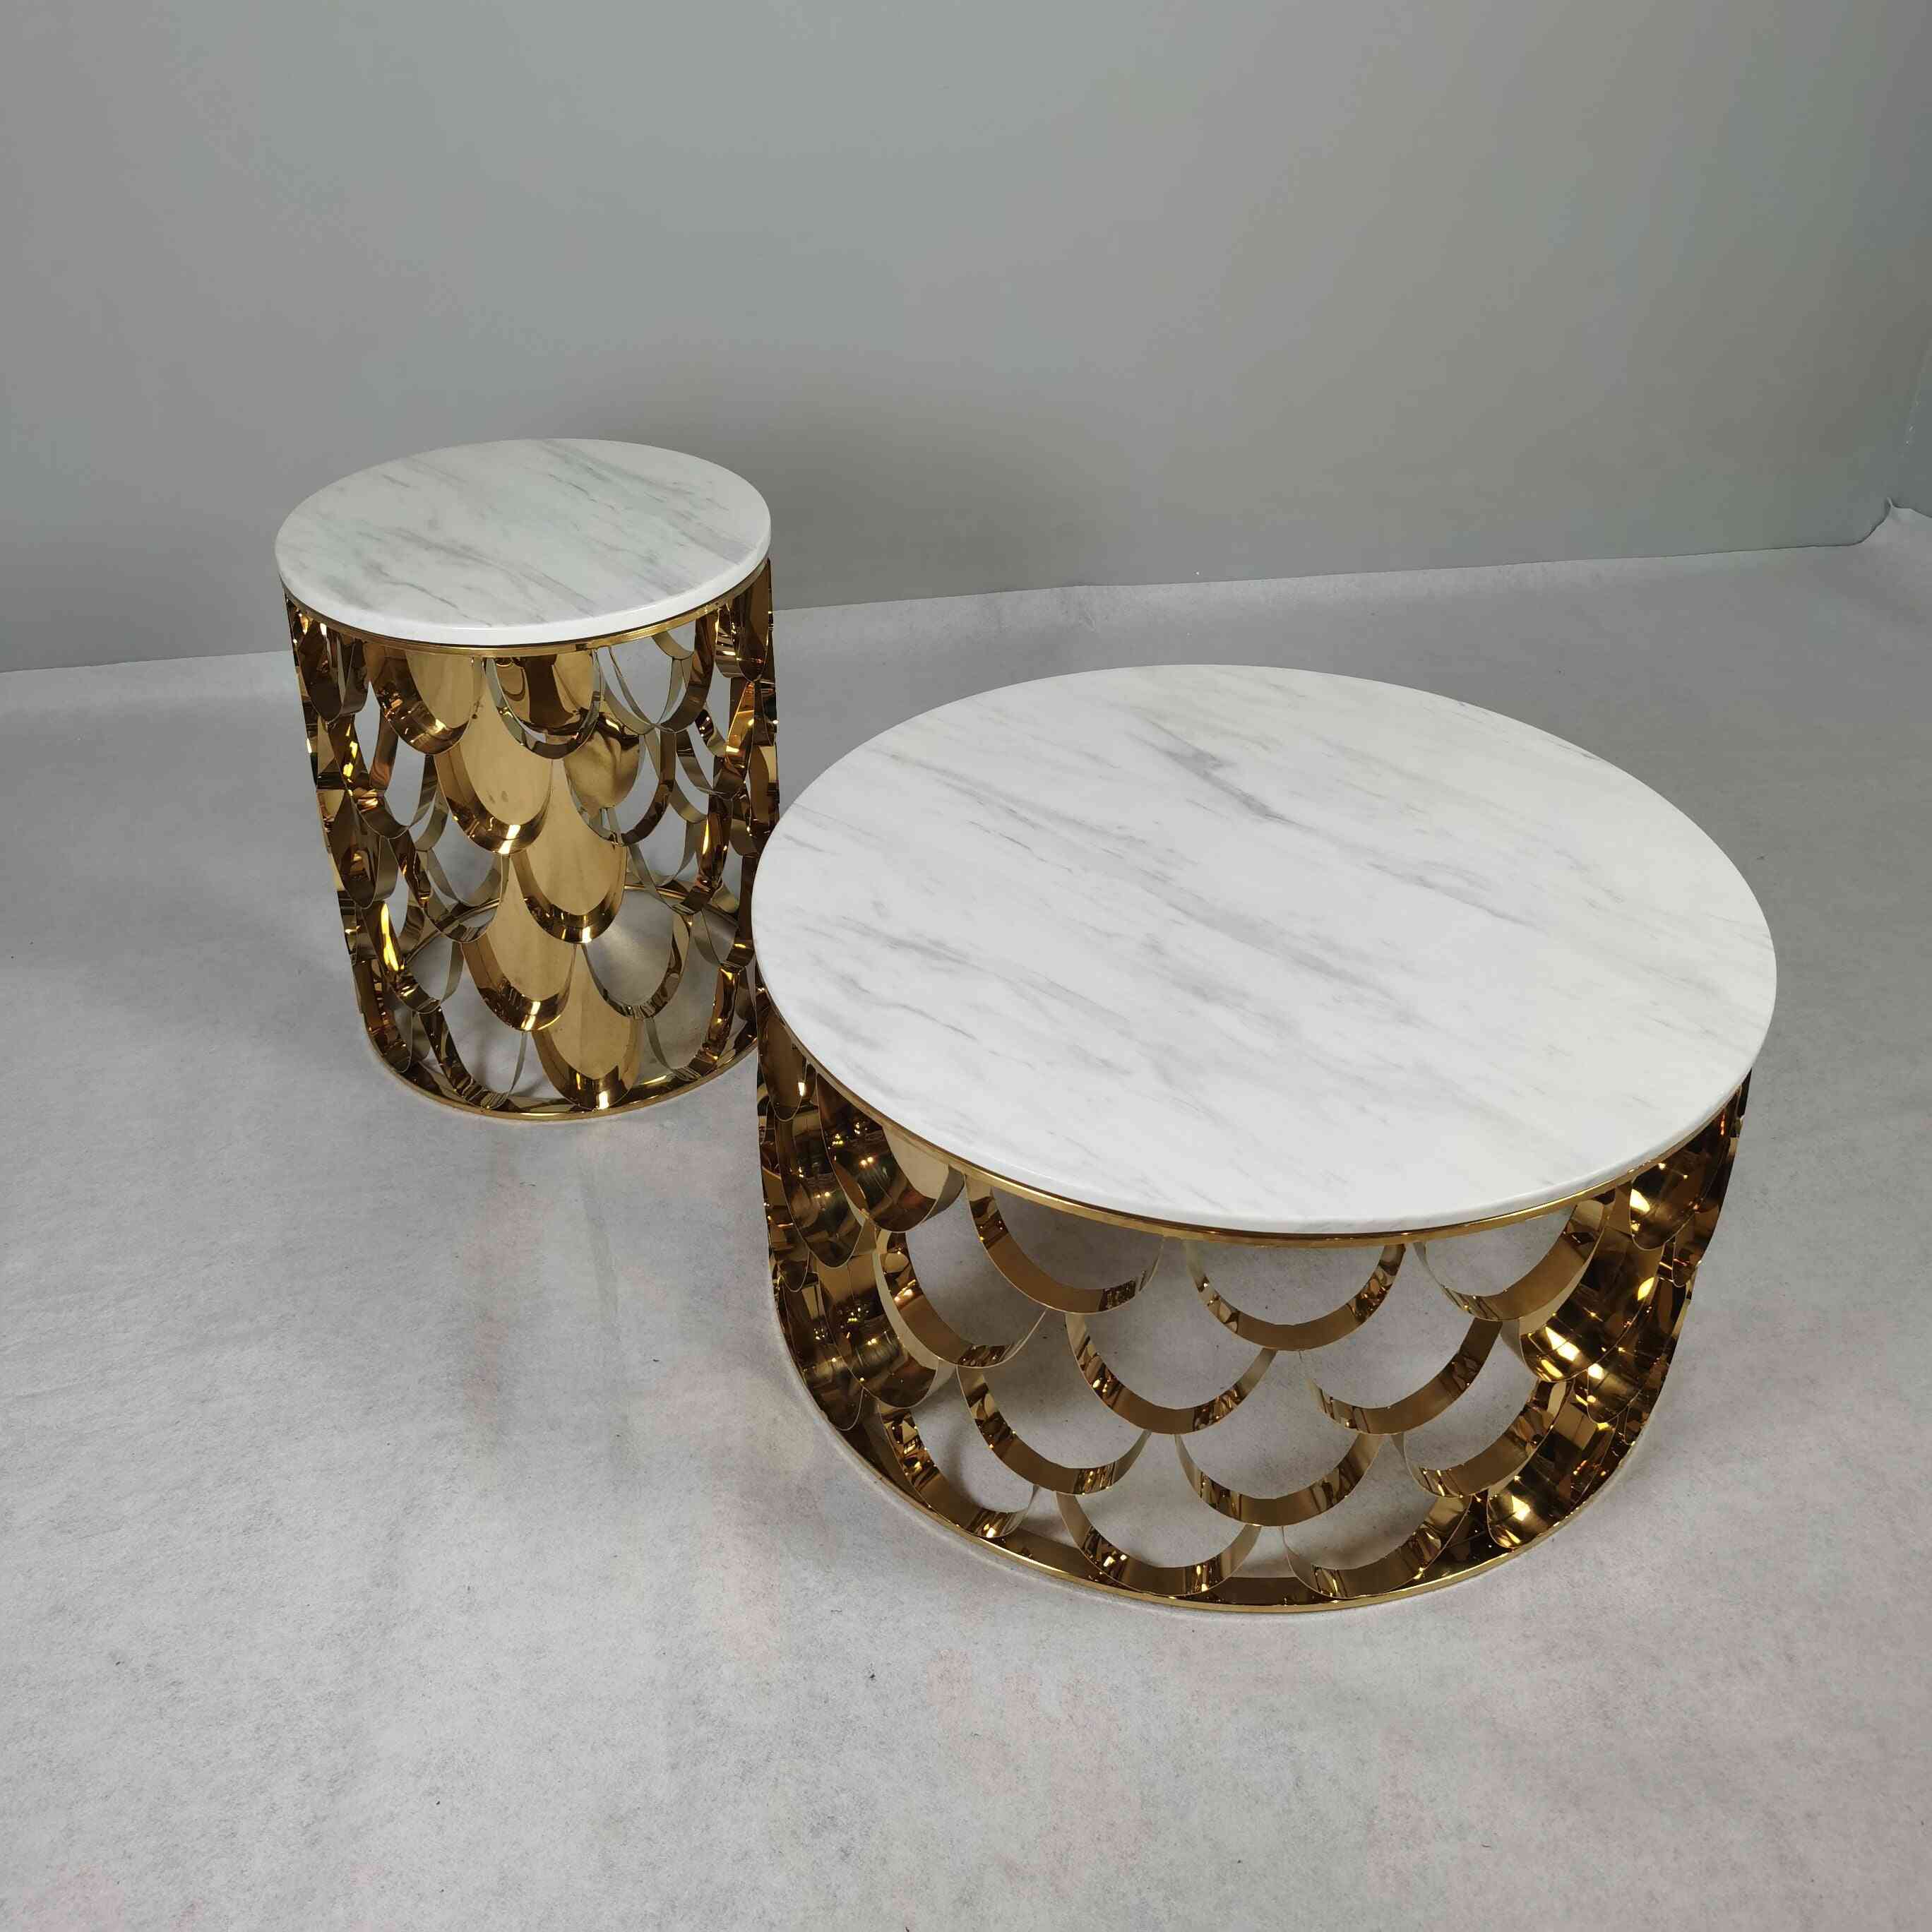 Modern Light Luxury Marble/glass Table Top Stainless Steel